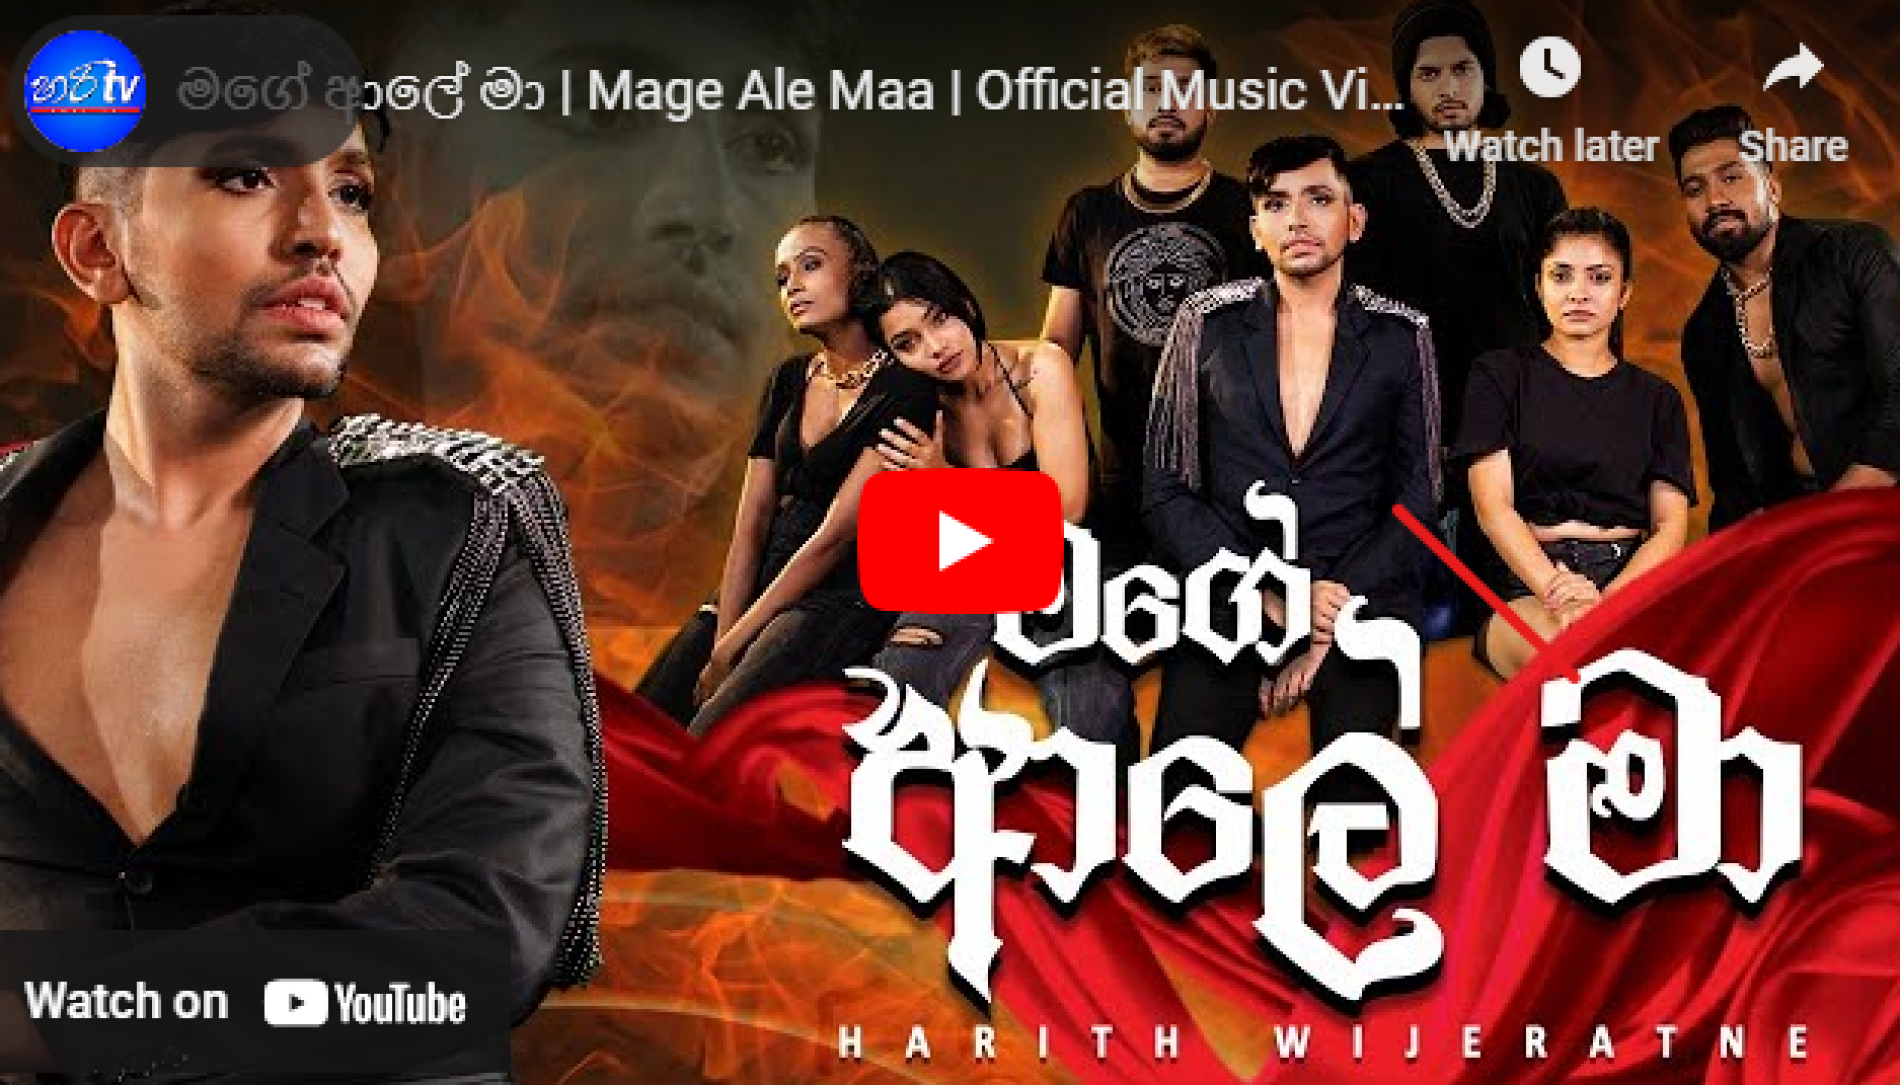 New Music : මගේ ආලේ මා | Mage Ale Maa | Official Music Video | Harith Wijeratne | Hari tv